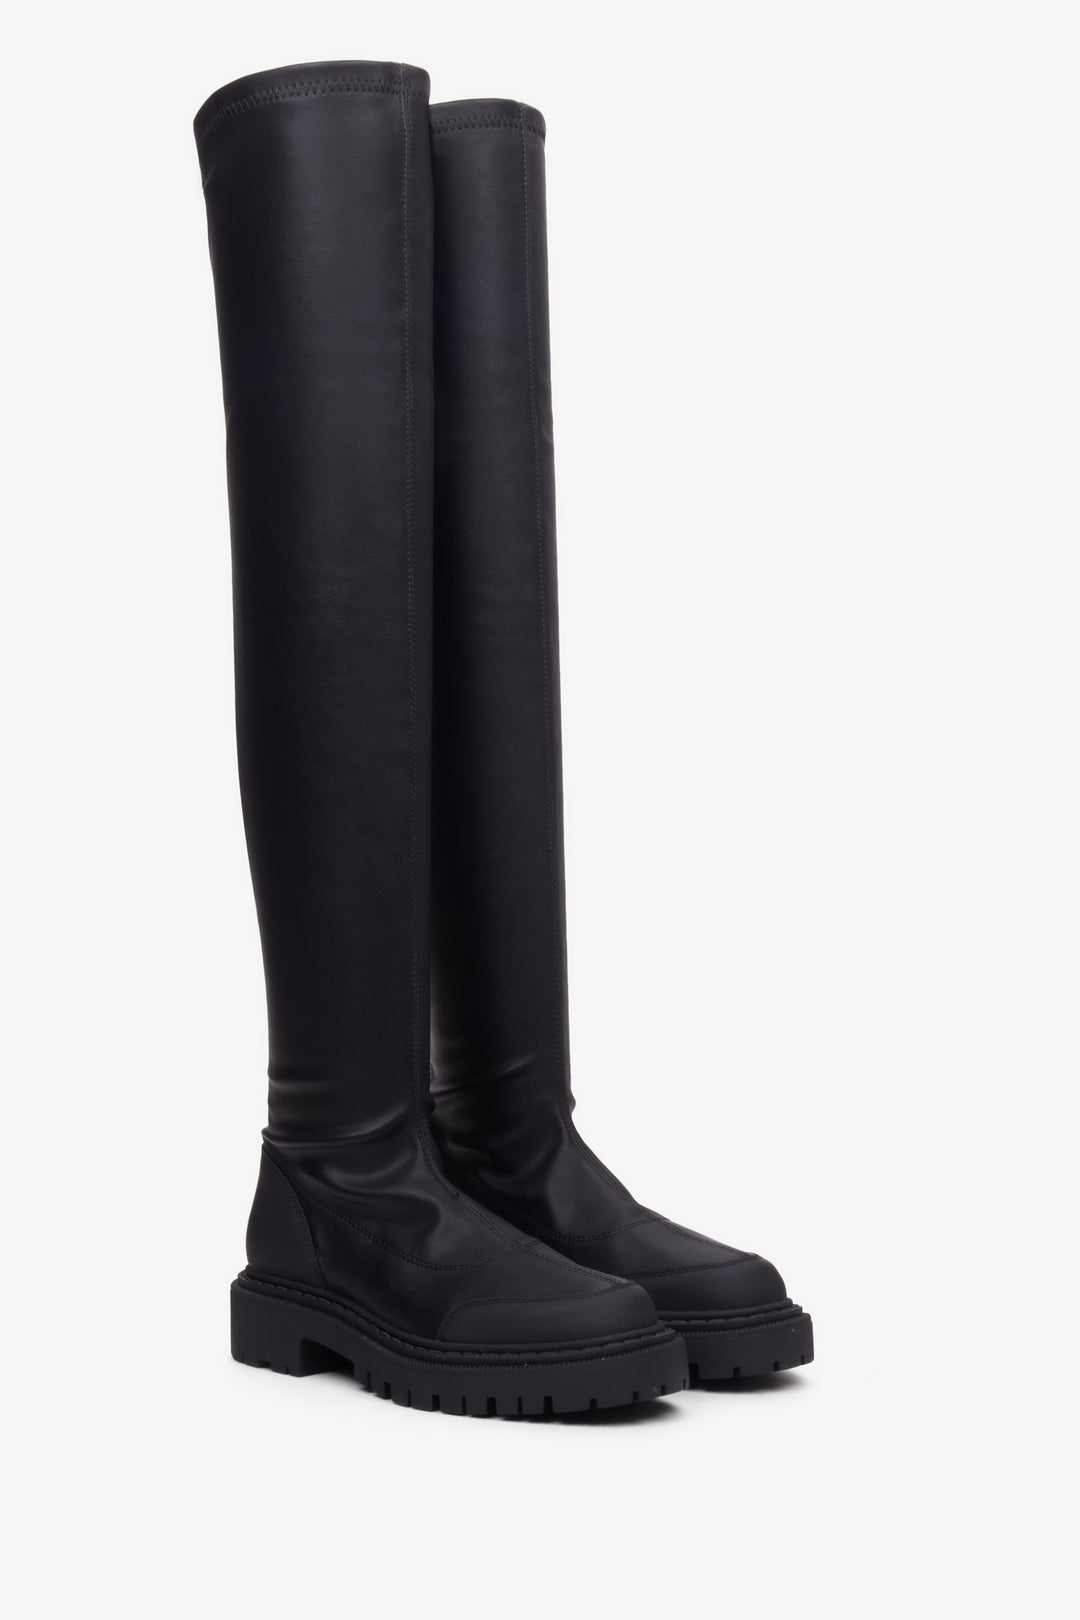 Estro brand black leather over-the-knee women's boots made of genuine leather.